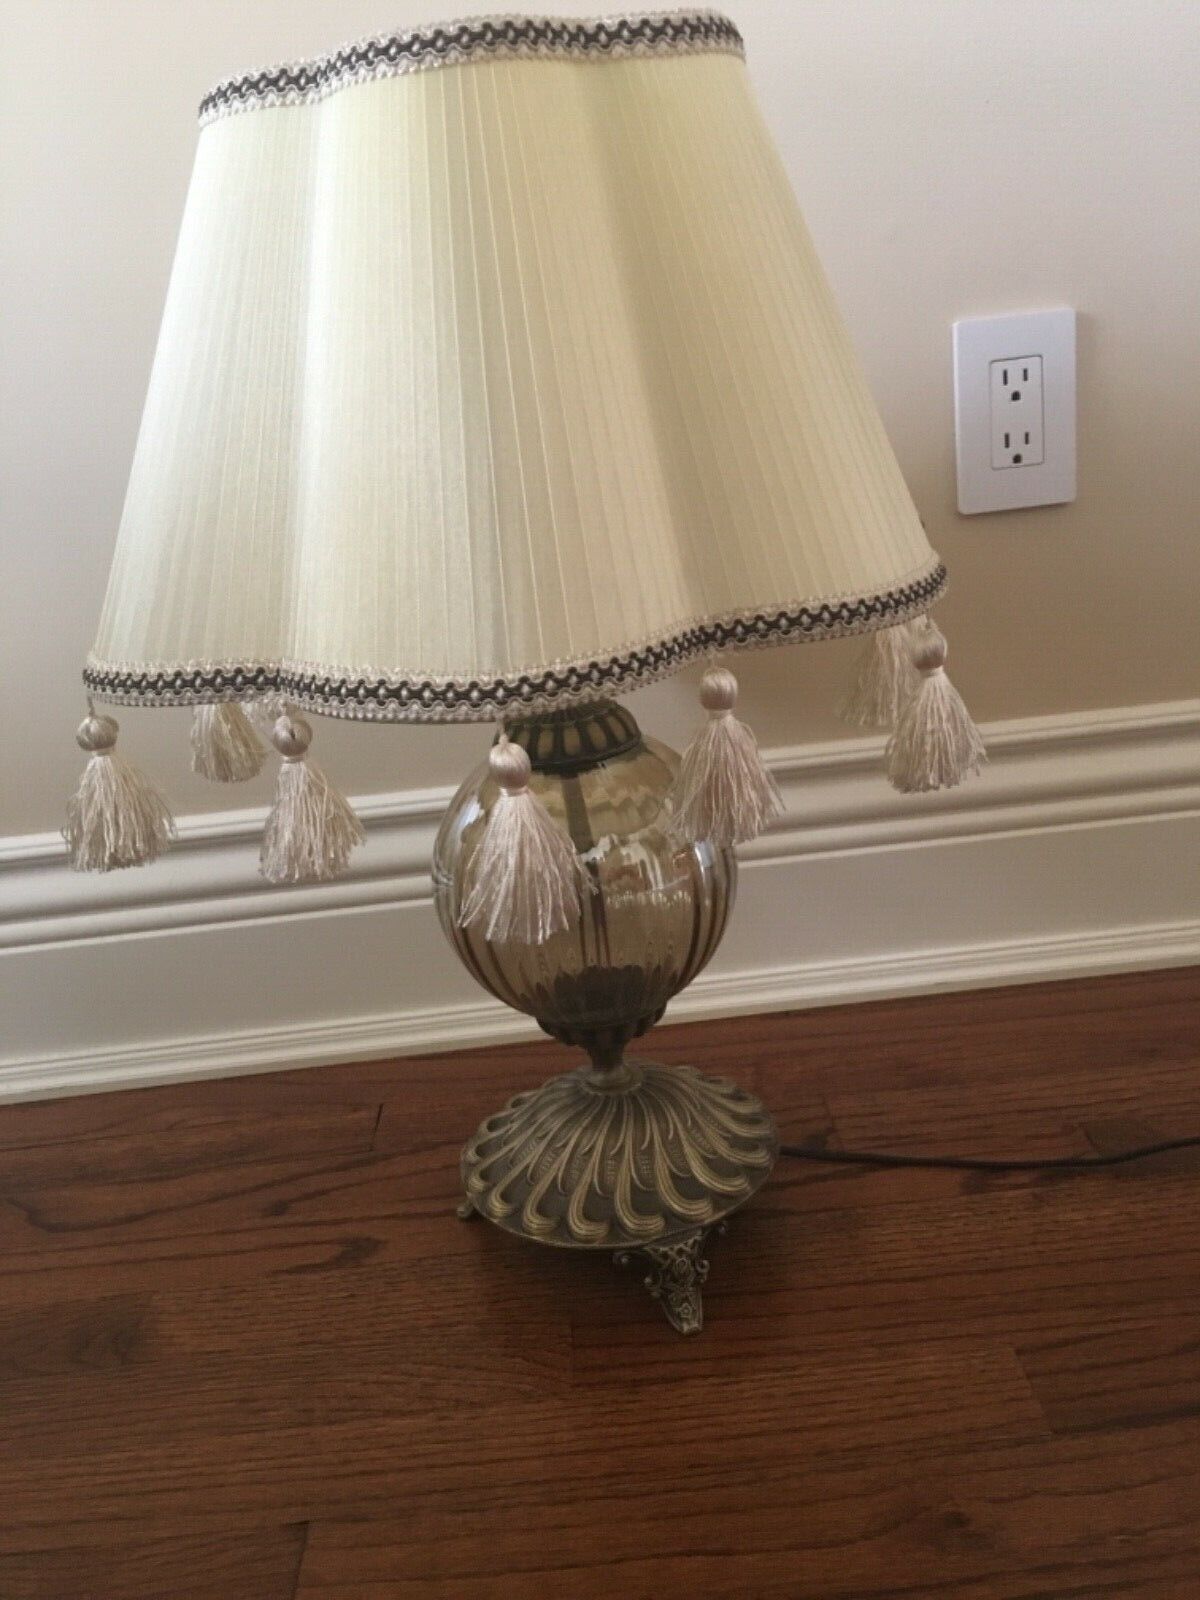 BRAND NEW ANTIQUE BRASS AND GLASS TABLE LAMP